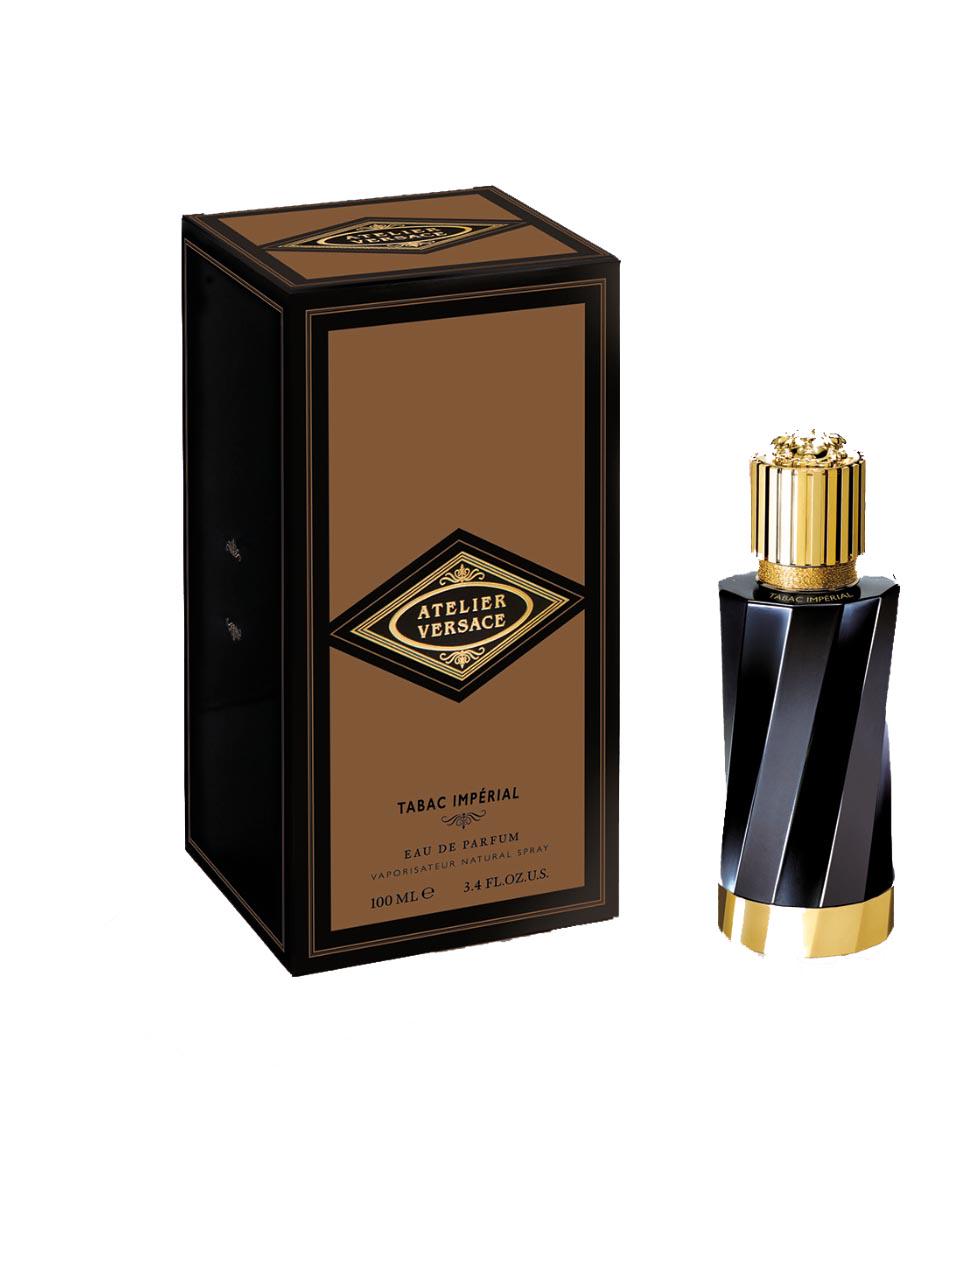 Versace Atelier Tabac Imperial